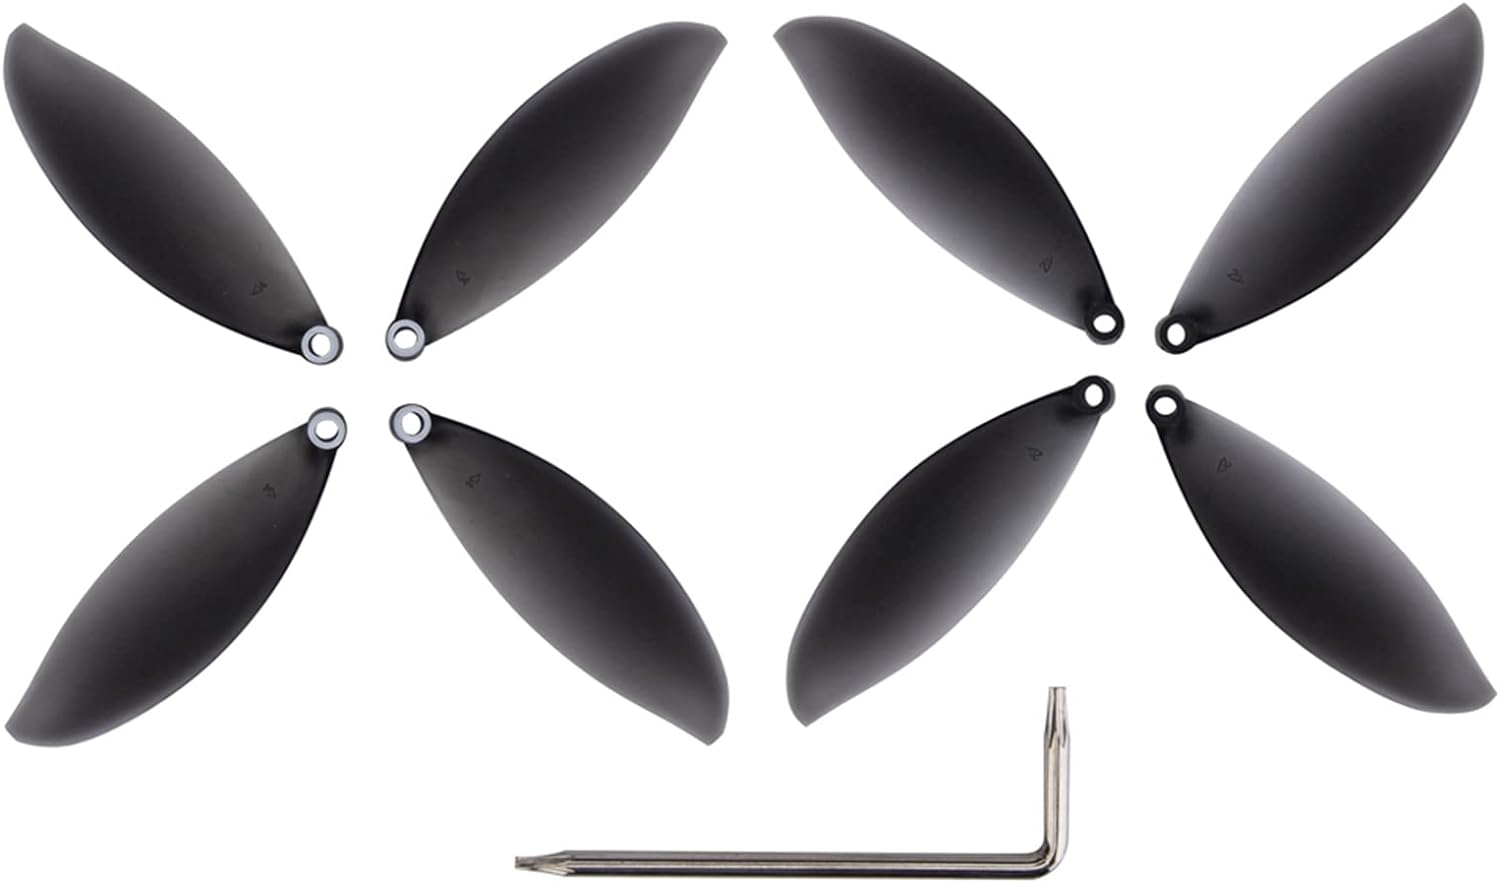 Parrot Anafi Propellers Parrot Anafi Blades Parrot Anafi Drone Blades 8pcs Parrot CCW/CW Propeller Blades Props Anafi Foldable Propellers Parrot Anafi Propeller Kit Anafi Parts for RC Quadcopter